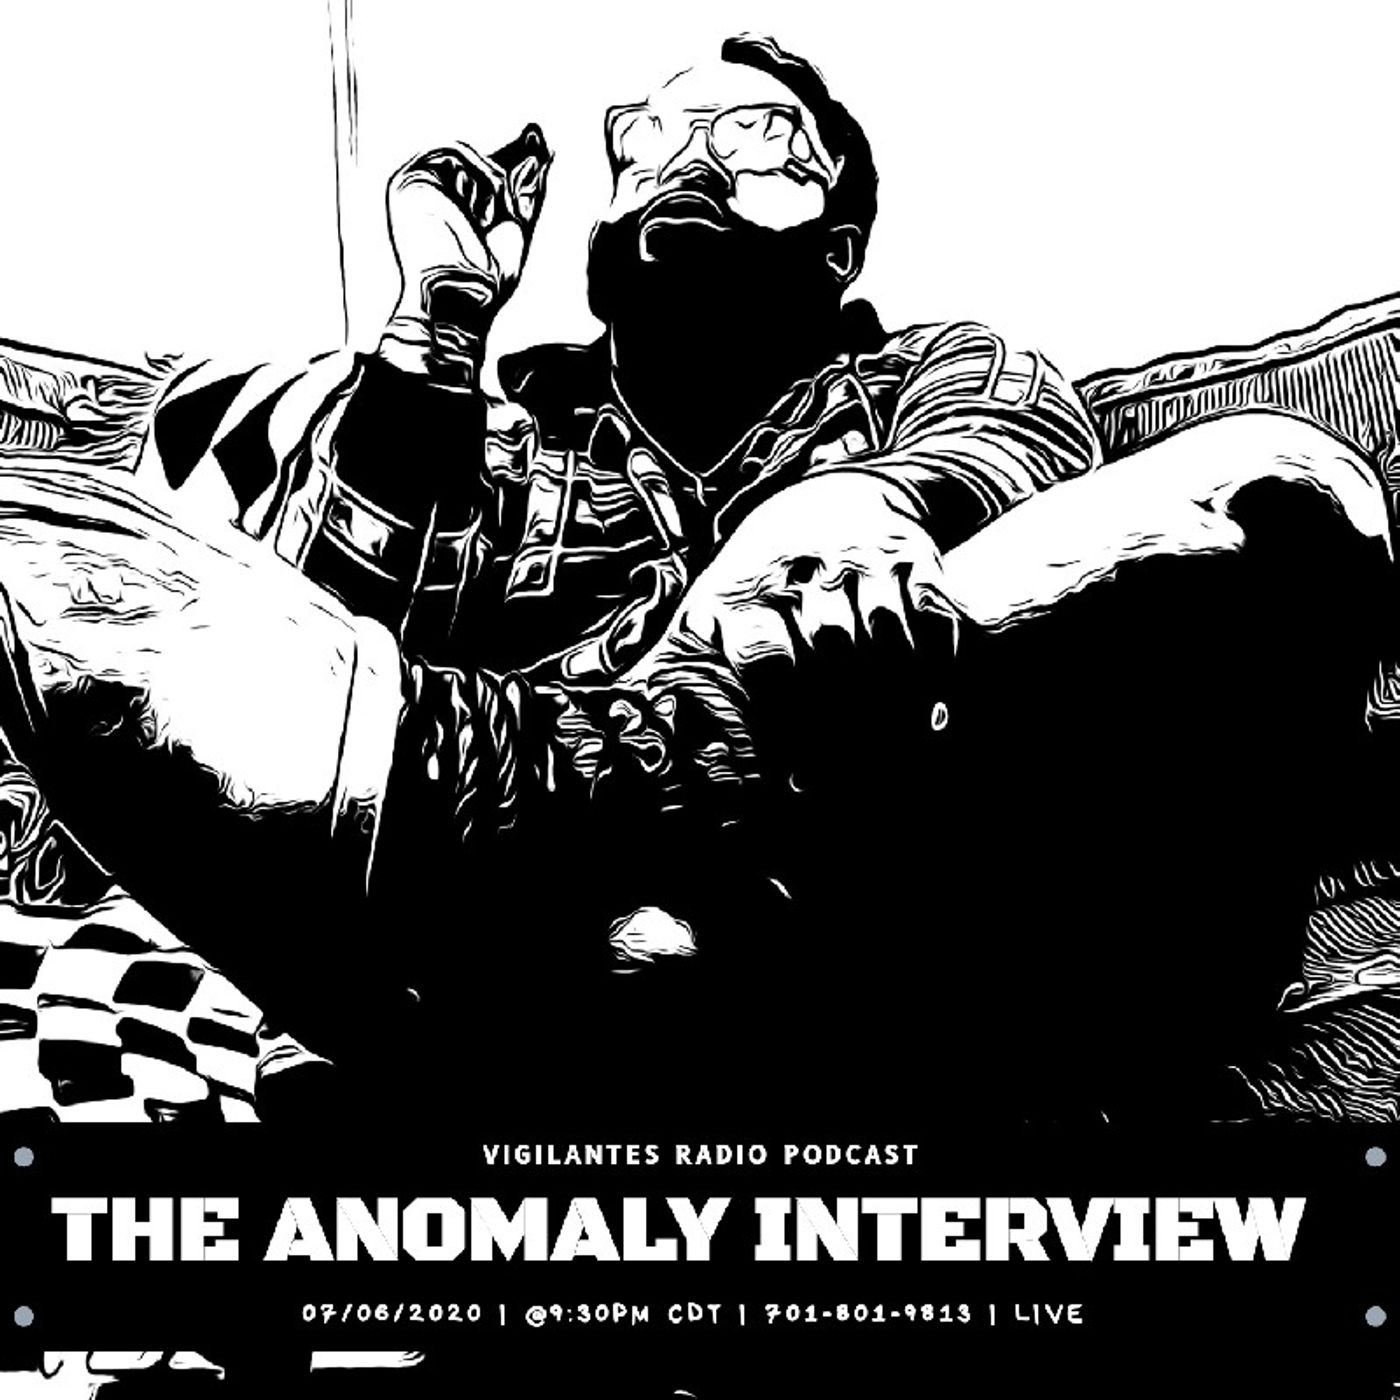 The Anomaly Interview. Image